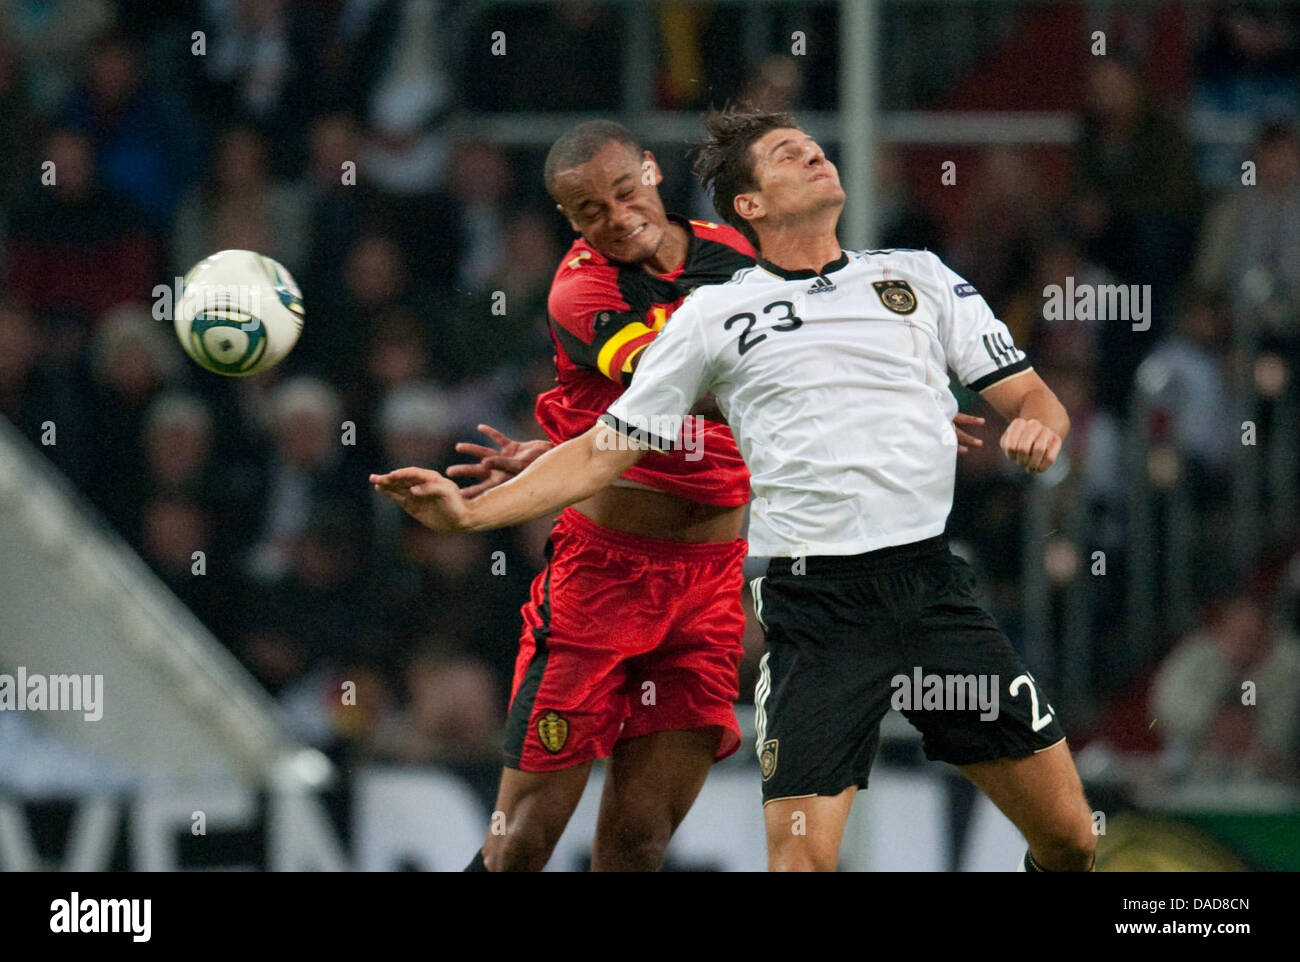 Germany's Mario Gomez (R) and Belgiums Vincent Kompany fight for the ball during the Group A EURO 2012 qualifying match between Germany and Belgium at the Esprit Arena in Duesseldorf, Germany, 11 October 2011. Photo: Bernd Thissen dpa/lnw  +++(c) dpa - Bildfunk+++ Stock Photo